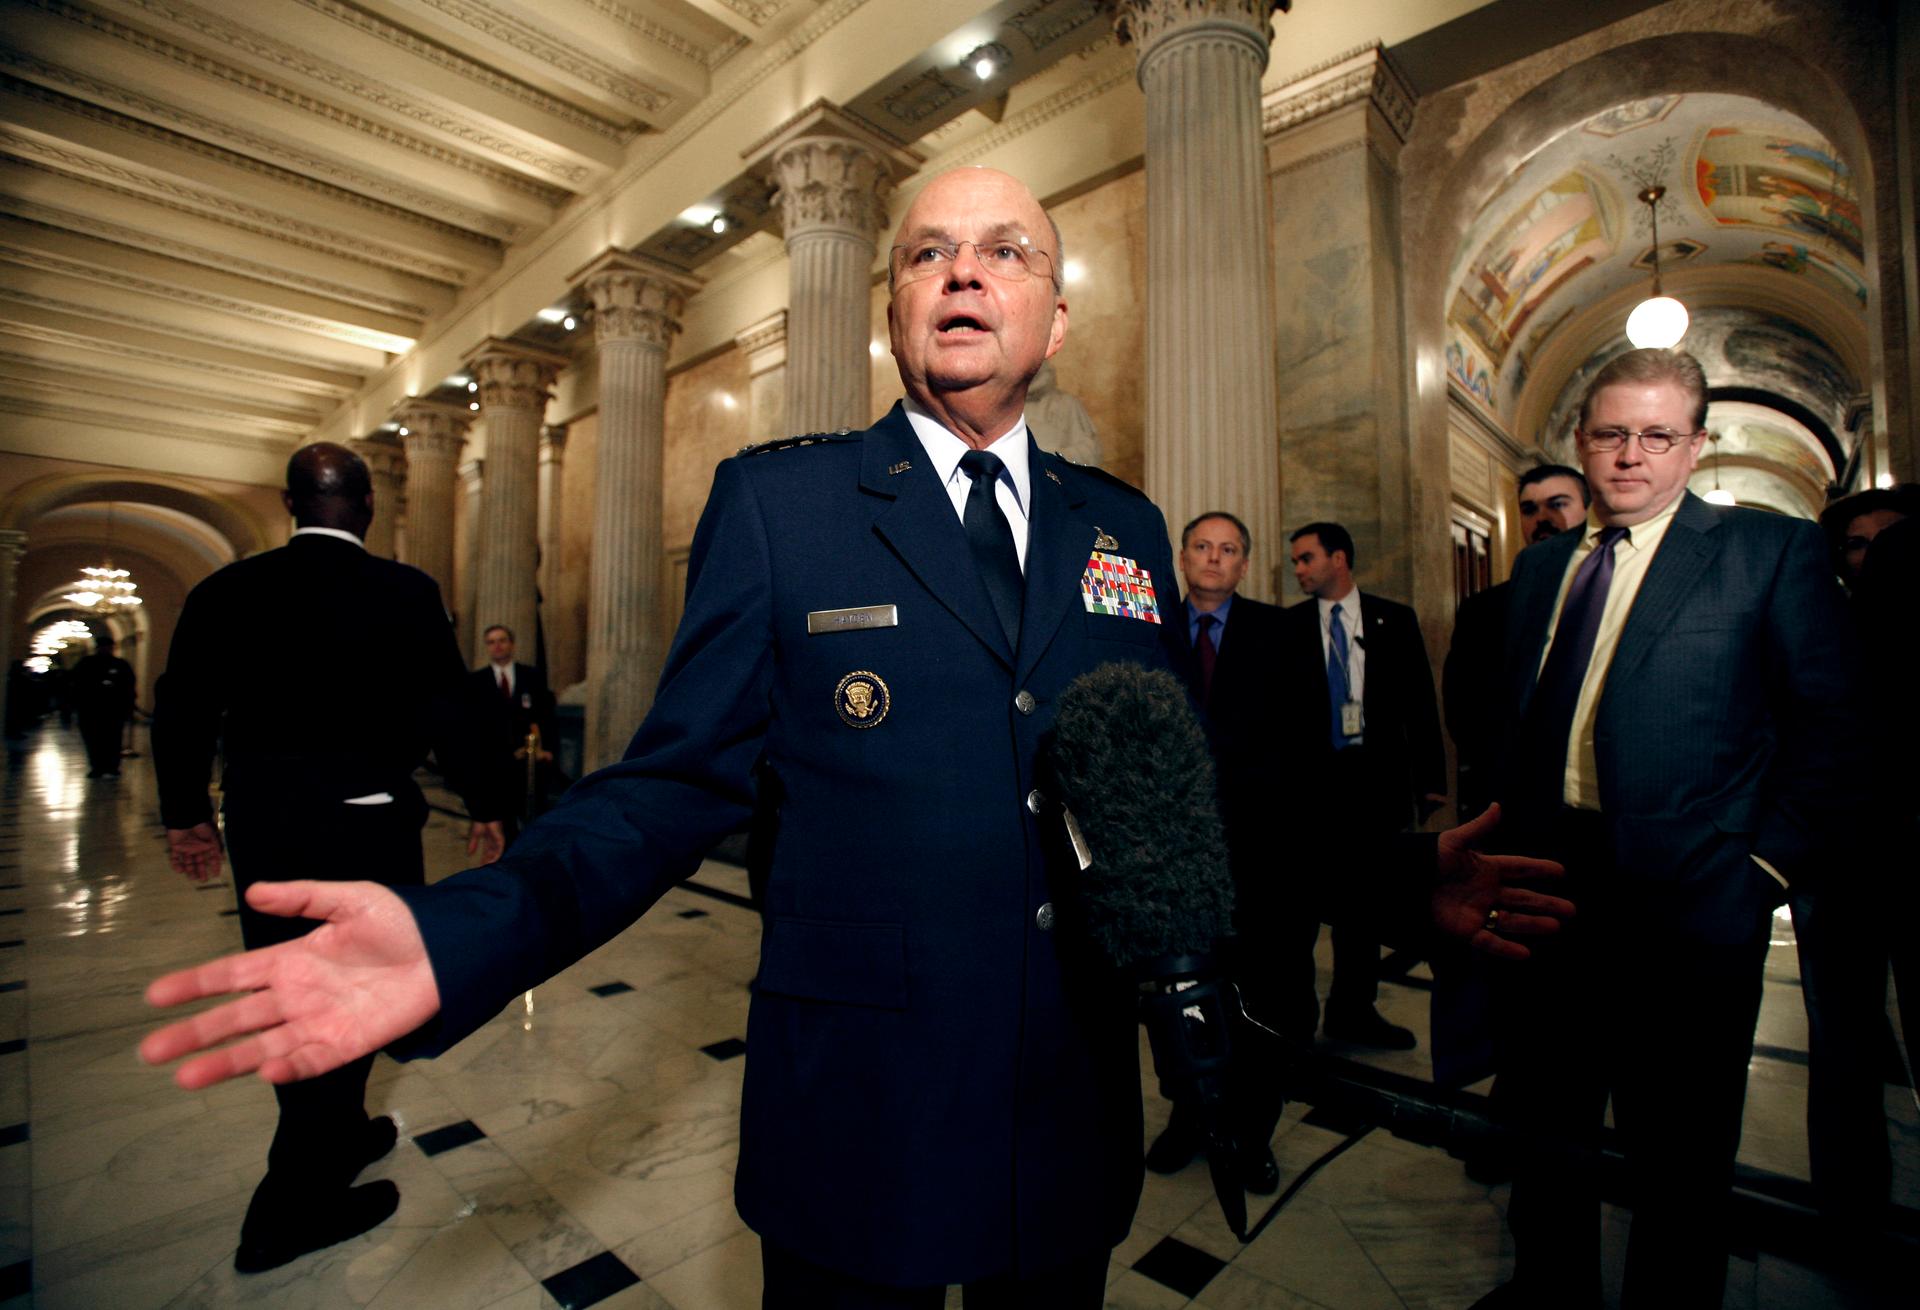 CIA Director Michael Hayden speaks to reporters upon his arrival in the Capitol for a meeting with the House Appropriations Committee's Select Intelligence Oversight Subcommittee, in Washington December 13, 2007.